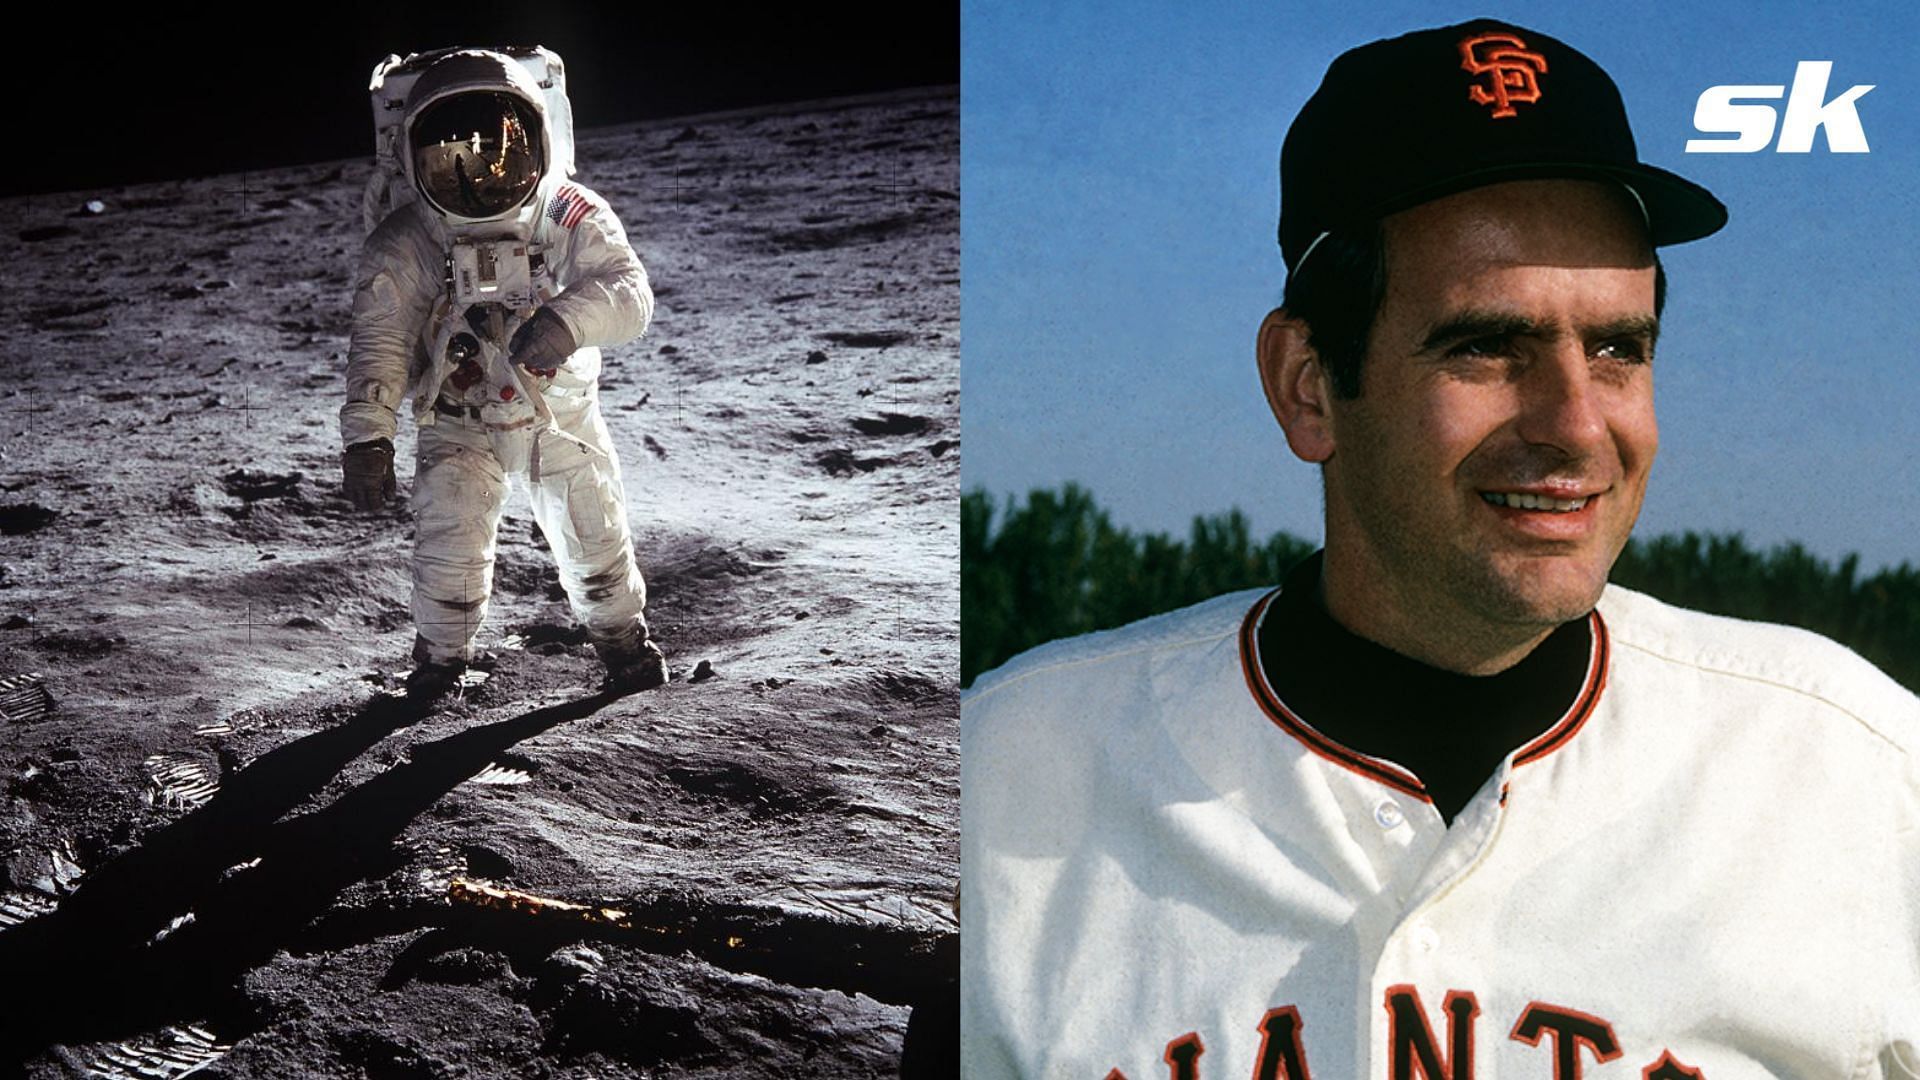 Gaylord Perry hit his first home run of his career less than one hour after man landed on the moon